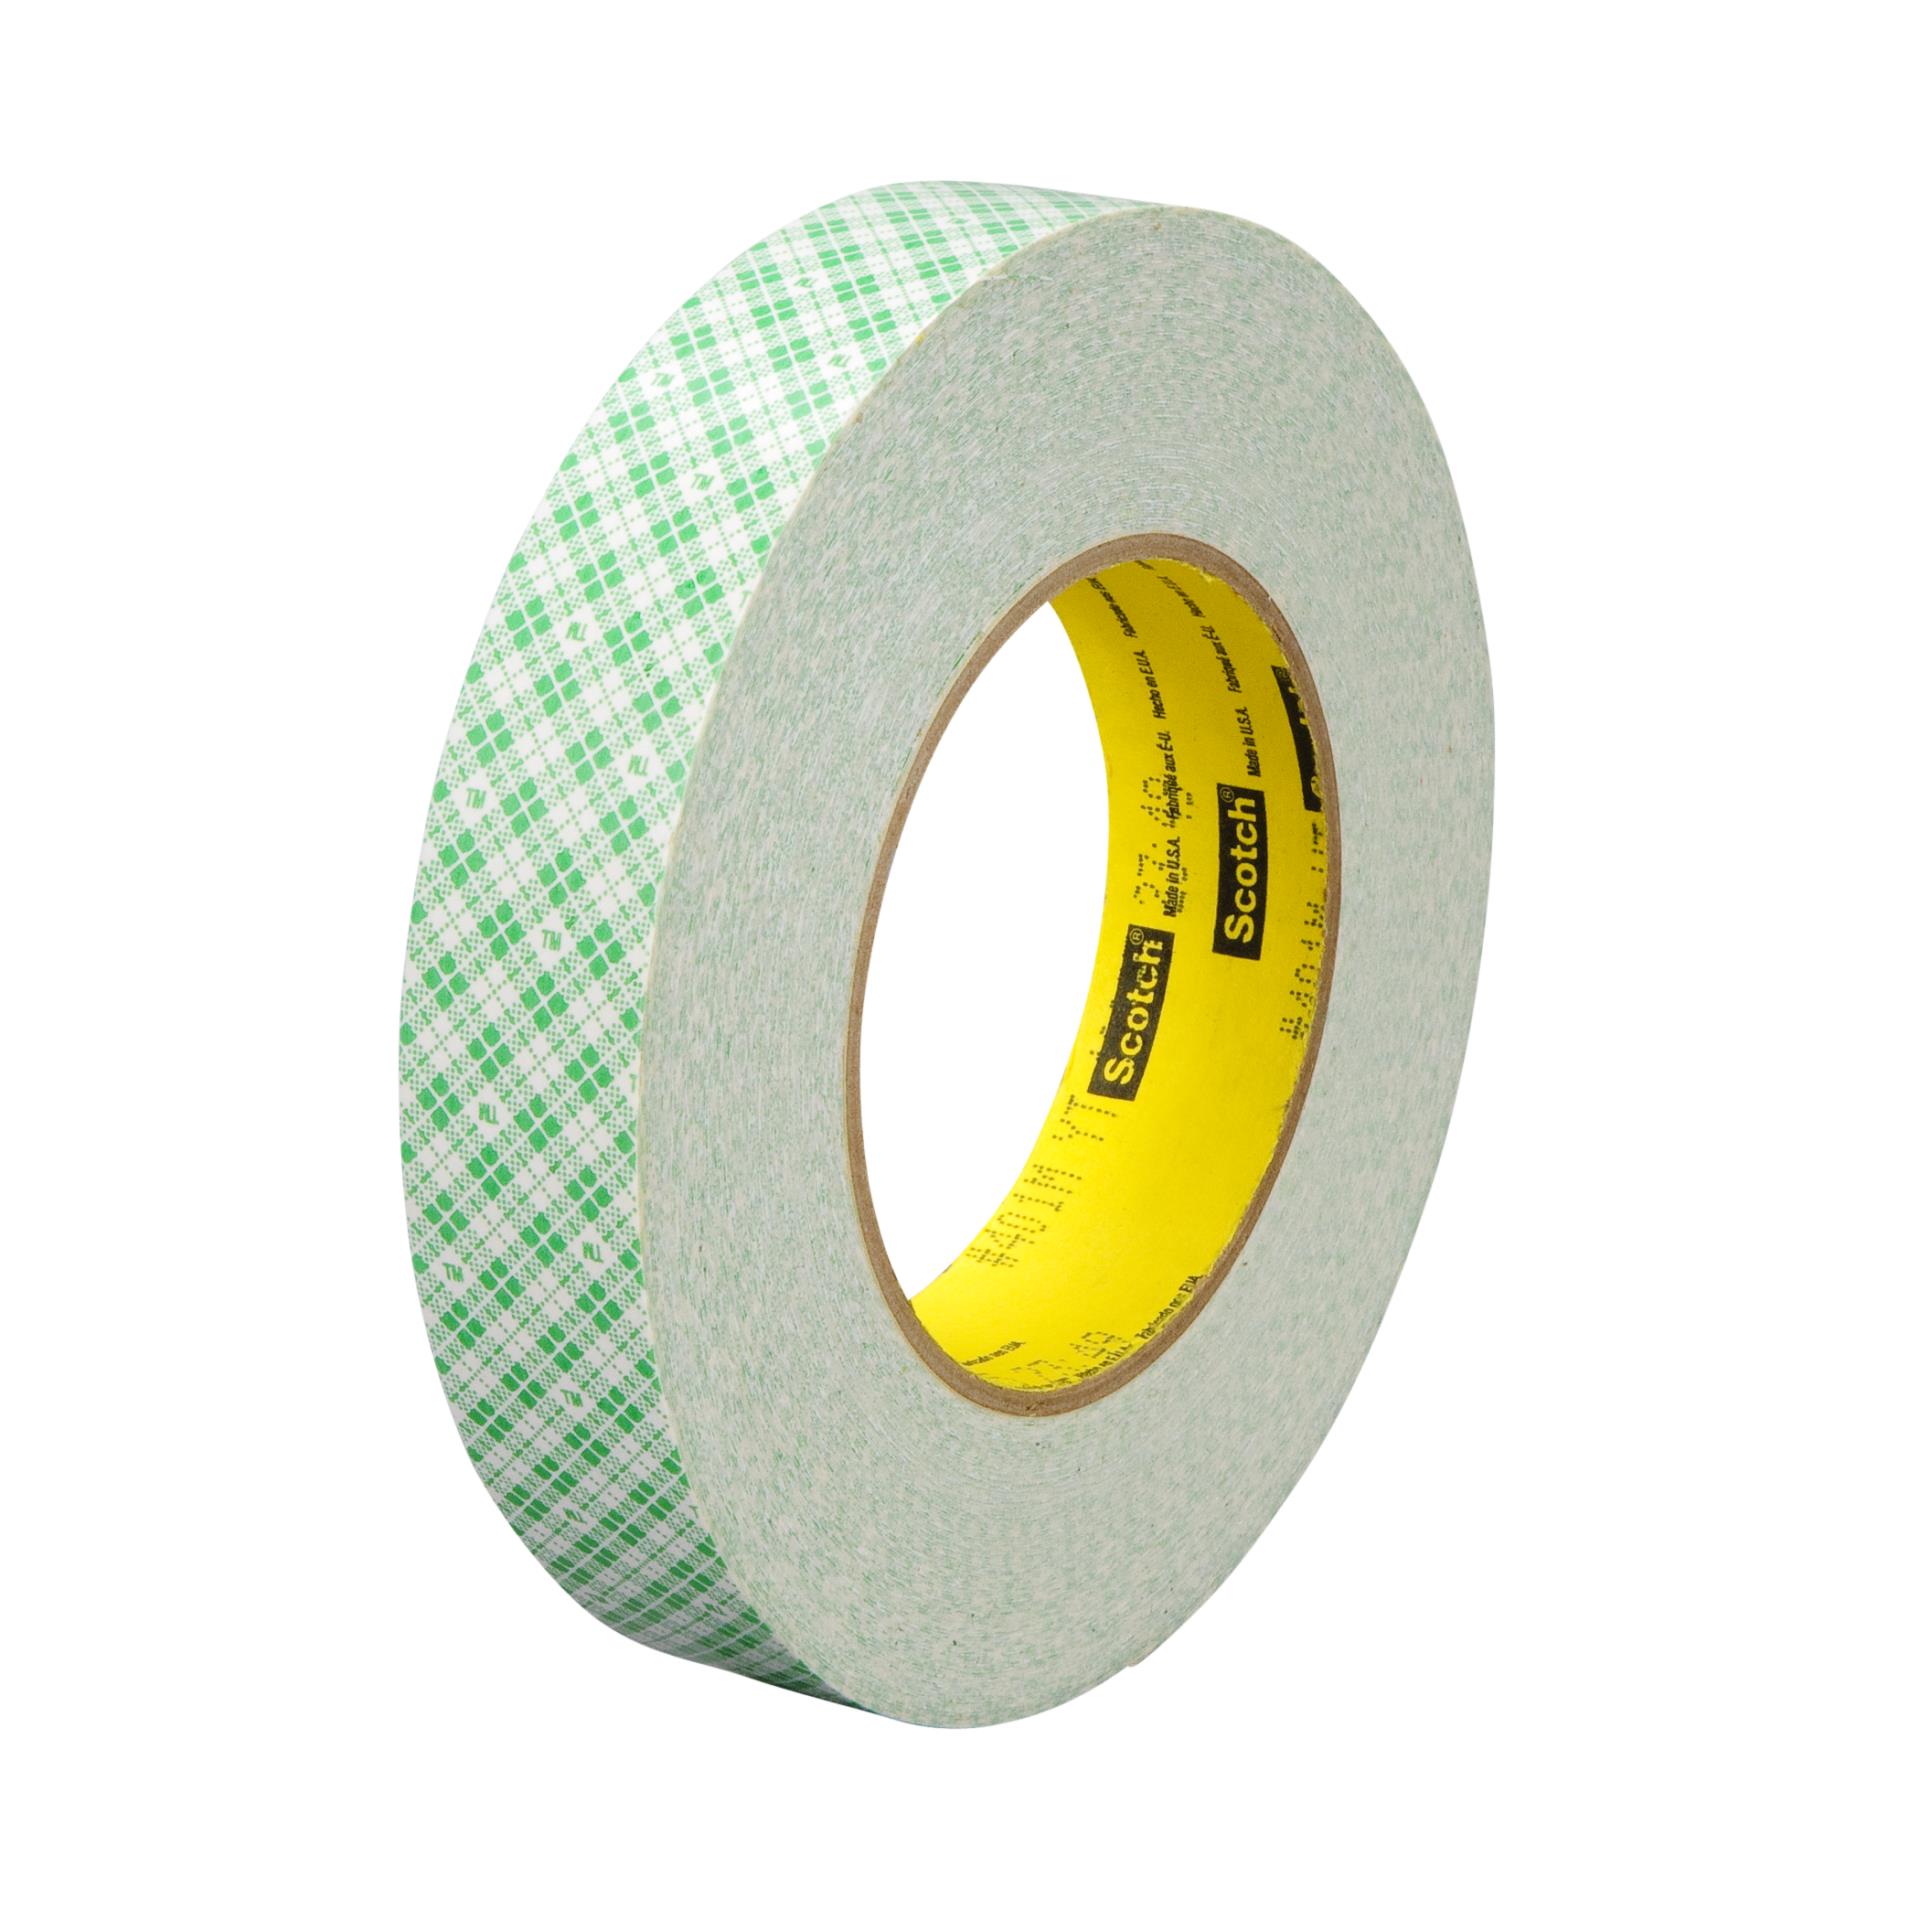 3M™ type 580 reflective vinyl tape black color 1" x 2 Meters,we cut entire roll 